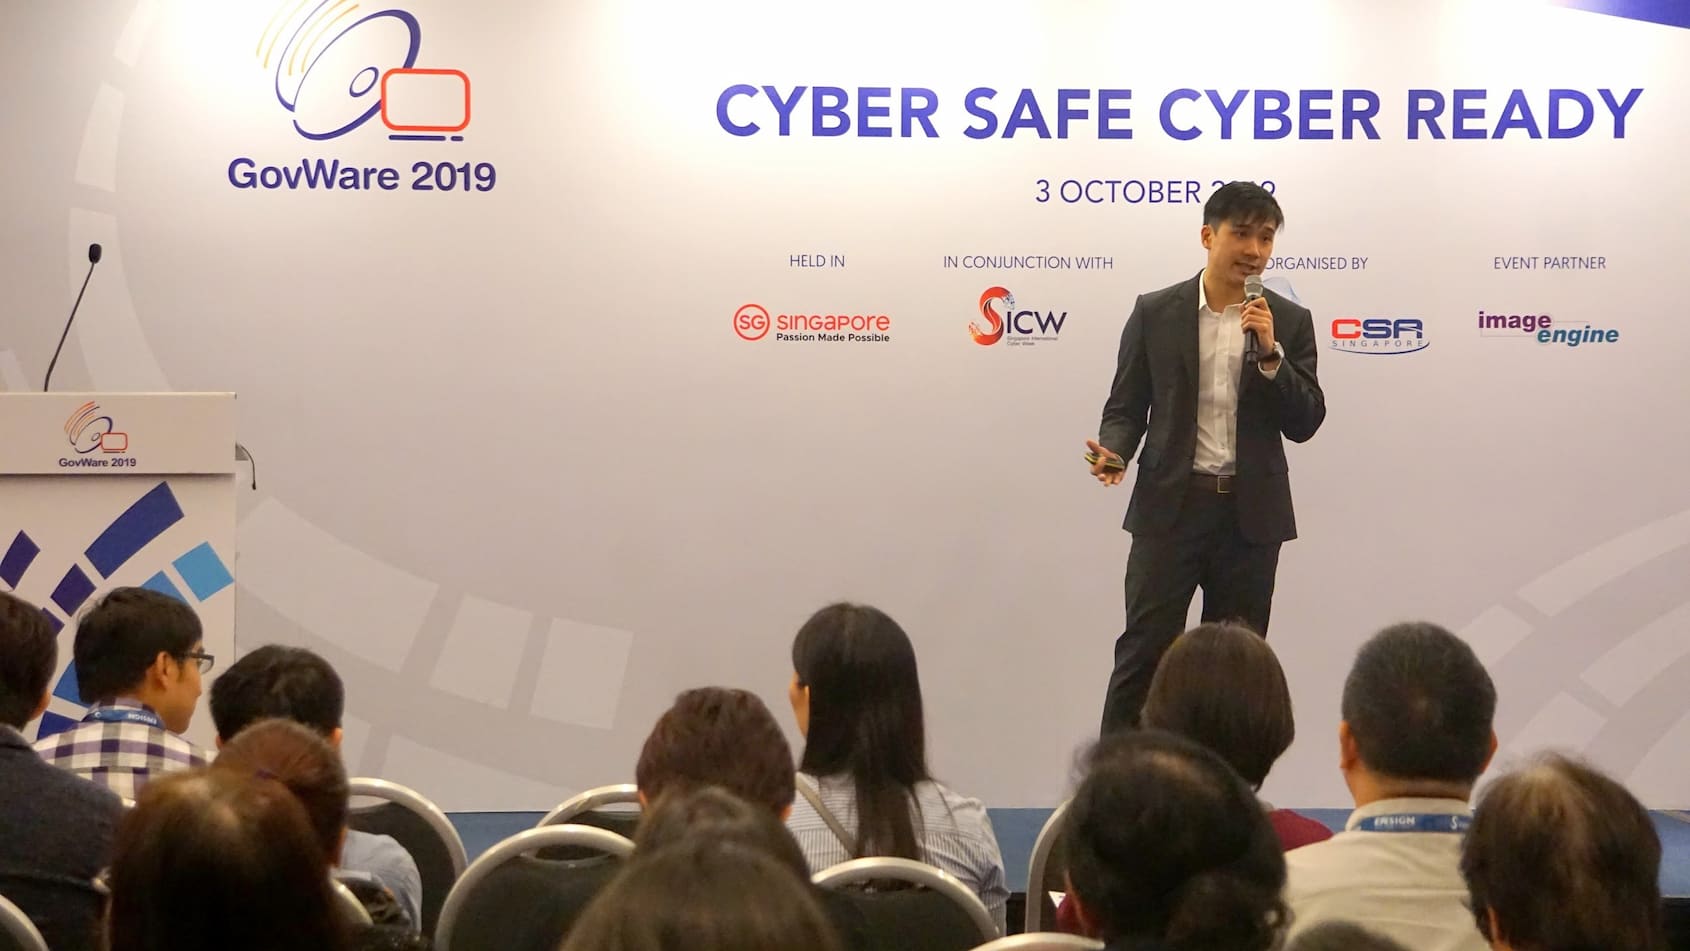 Mr Shane Woo, an associate cybersecurity analyst at GovTech speaking at a cybersecurity conference